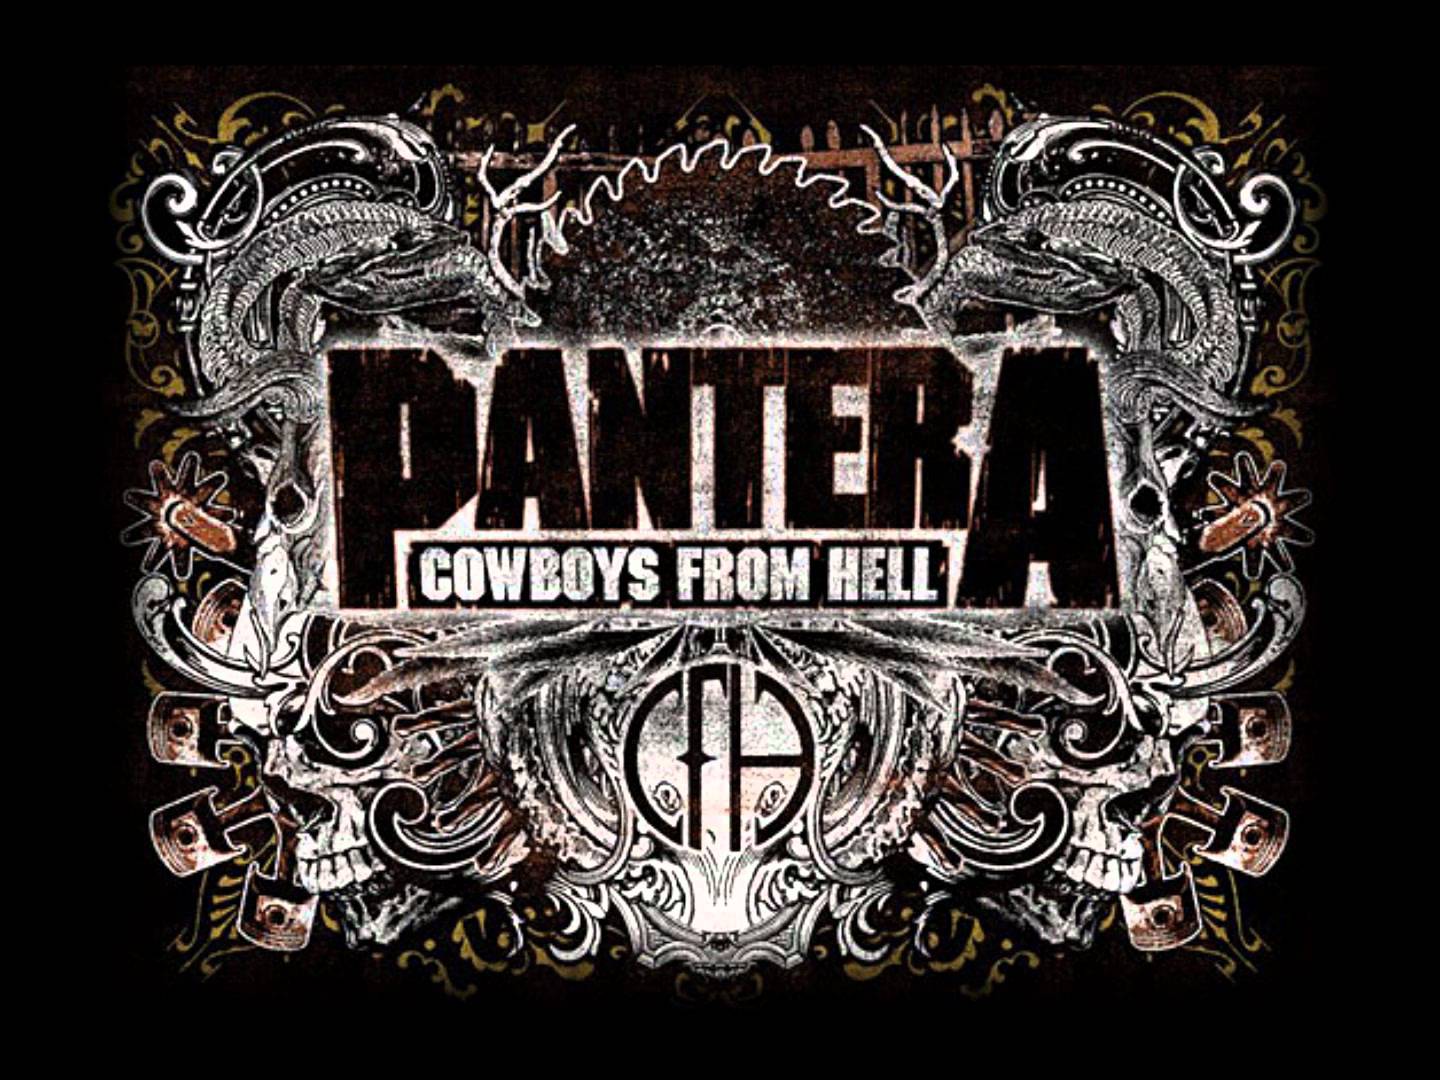 Cowboys from hell Logos